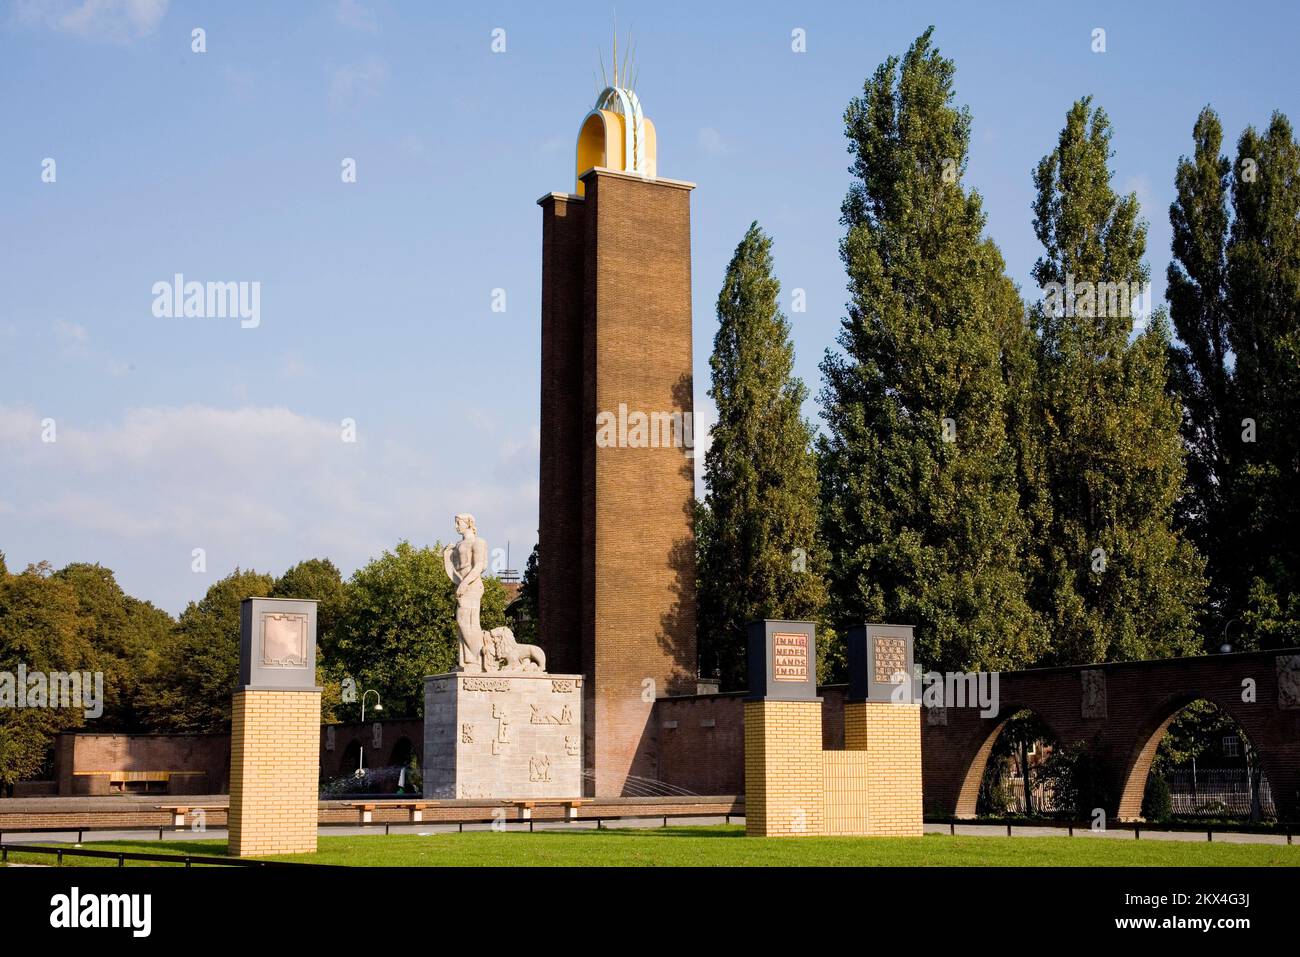 Netherlands, Amsterdam - The Indie monument was originally a memorial for General J. B. van Heutsz, who was the commandant of the Royal Netherlands Ea Stock Photo